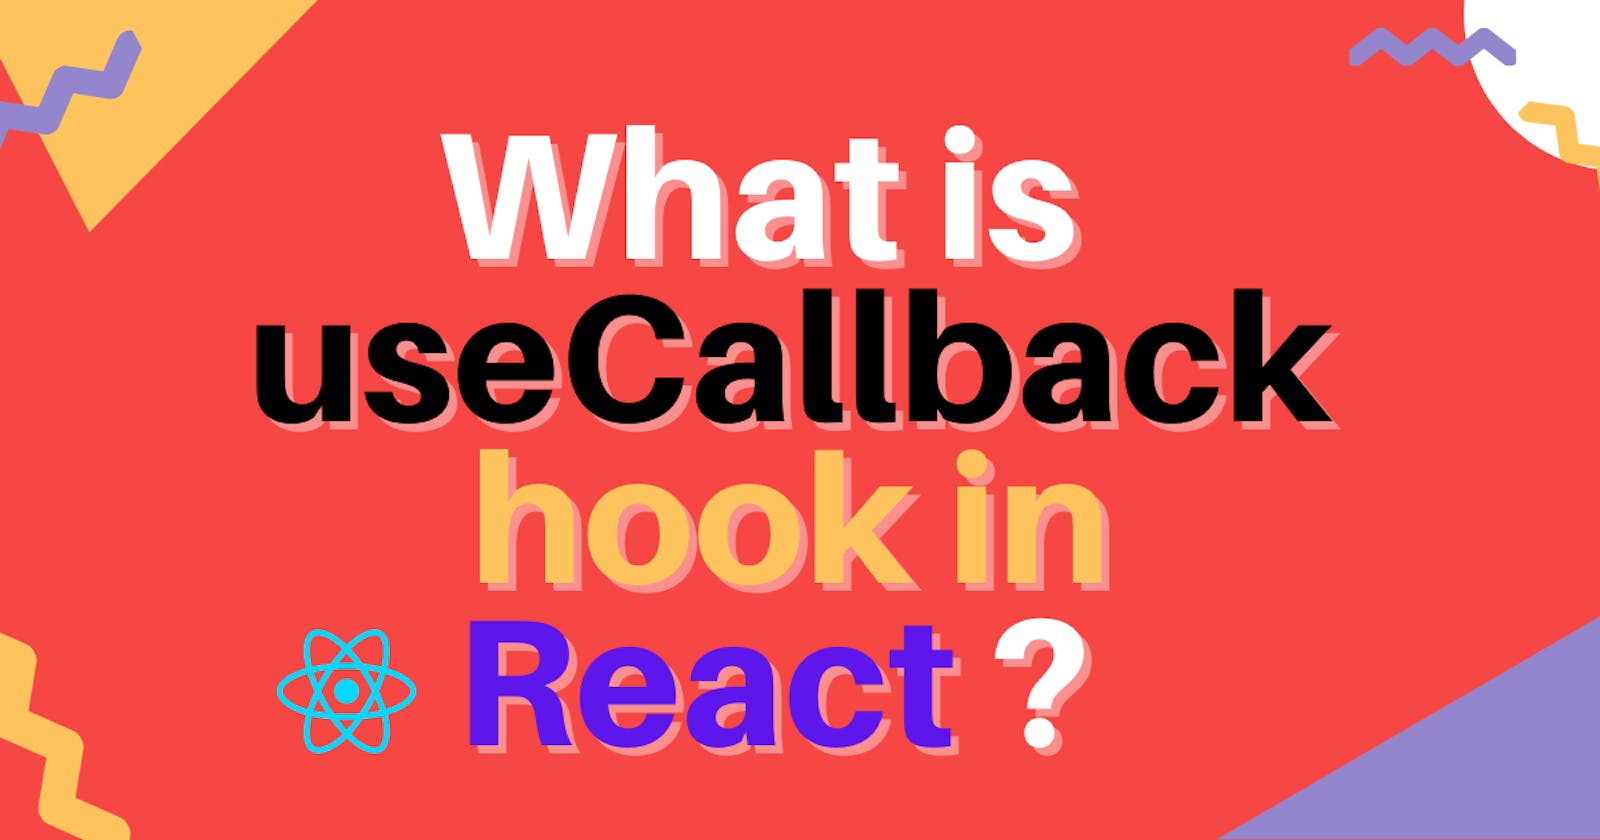 What is useCallback hook in React?